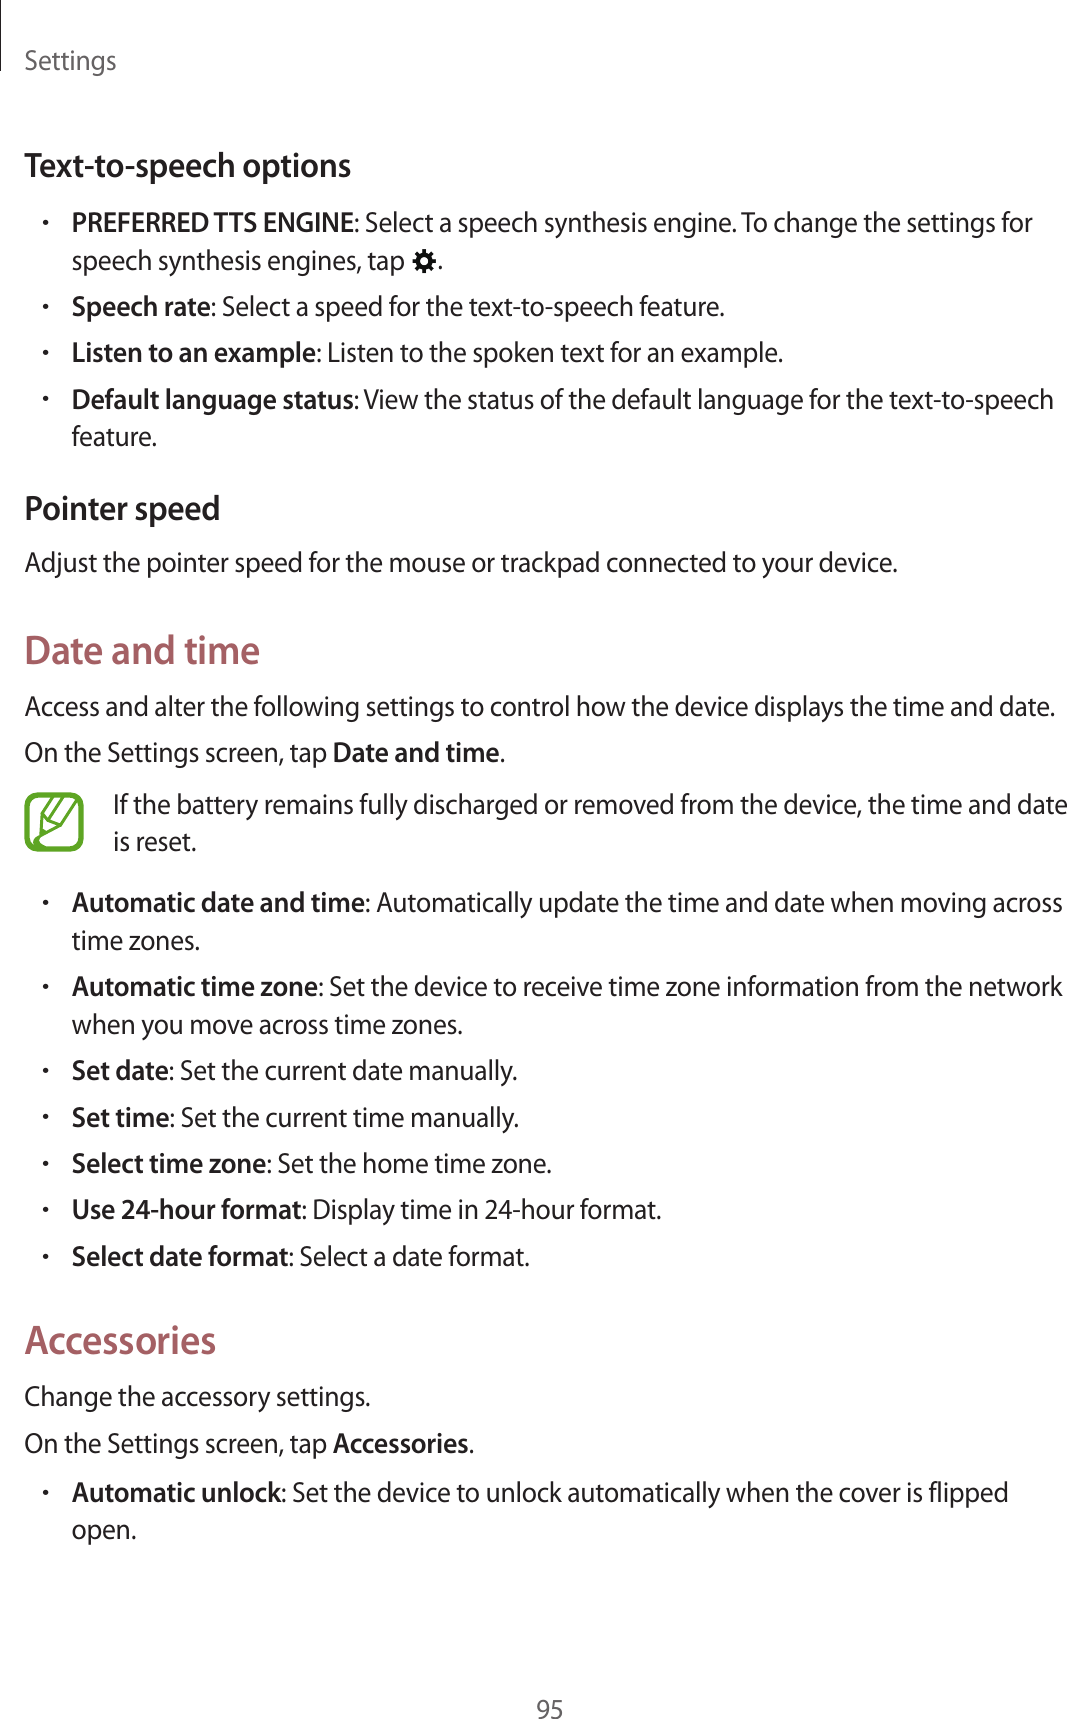 Settings95Text-to-speech options•PREFERRED TTS ENGINE: Select a speech synthesis engine. To change the settings for speech synthesis engines, tap  .•Speech rate: Select a speed for the text-to-speech feature.•Listen to an example: Listen to the spoken text for an example.•Default language status: View the status of the default language for the text-to-speech feature.Pointer speedAdjust the pointer speed for the mouse or trackpad connected to your device.Date and timeAccess and alter the following settings to control how the device displays the time and date.On the Settings screen, tap Date and time.If the battery remains fully discharged or removed from the device, the time and date is reset.•Automatic date and time: Automatically update the time and date when moving across time zones.•Automatic time zone: Set the device to receive time zone information from the network when you move across time zones.•Set date: Set the current date manually.•Set time: Set the current time manually.•Select time zone: Set the home time zone.•Use 24-hour format: Display time in 24-hour format.•Select date format: Select a date format.AccessoriesChange the accessory settings.On the Settings screen, tap Accessories.•Automatic unlock: Set the device to unlock automatically when the cover is flipped open.